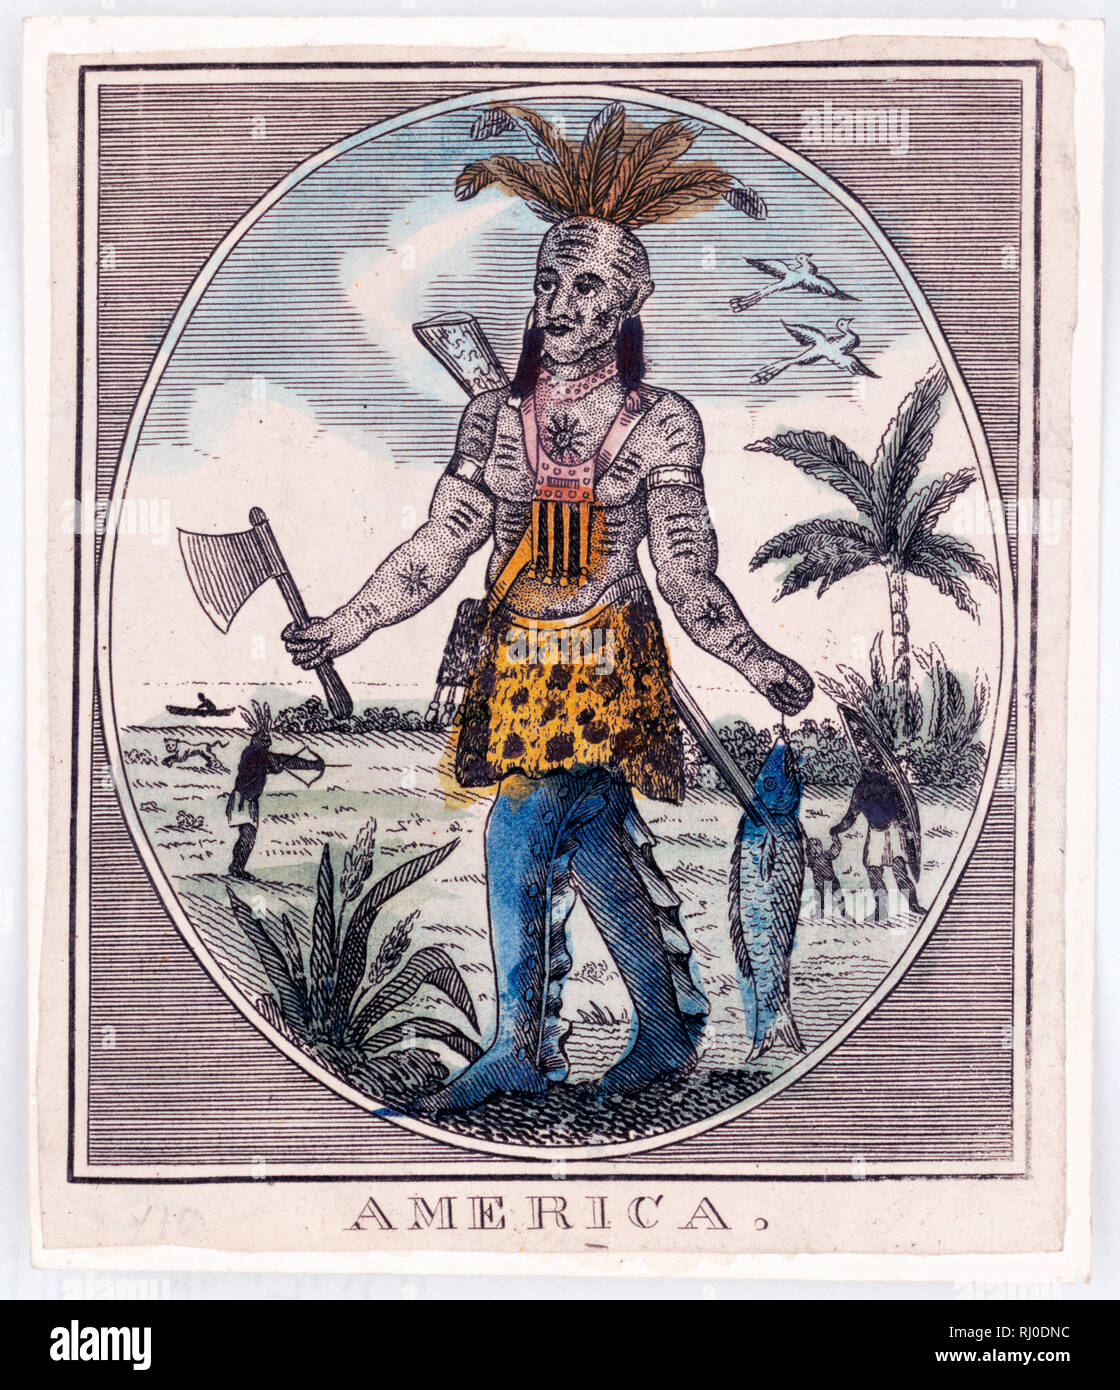 Print shows a Native man, full-length portrait, facing left, wearing a feathered headdress, a waist-cloth and leggings, with a rifle strapped to his back, carrying a hatchet in his right hand and a fish in his left, in a tropical region; in a circular medallion. Stock Photo